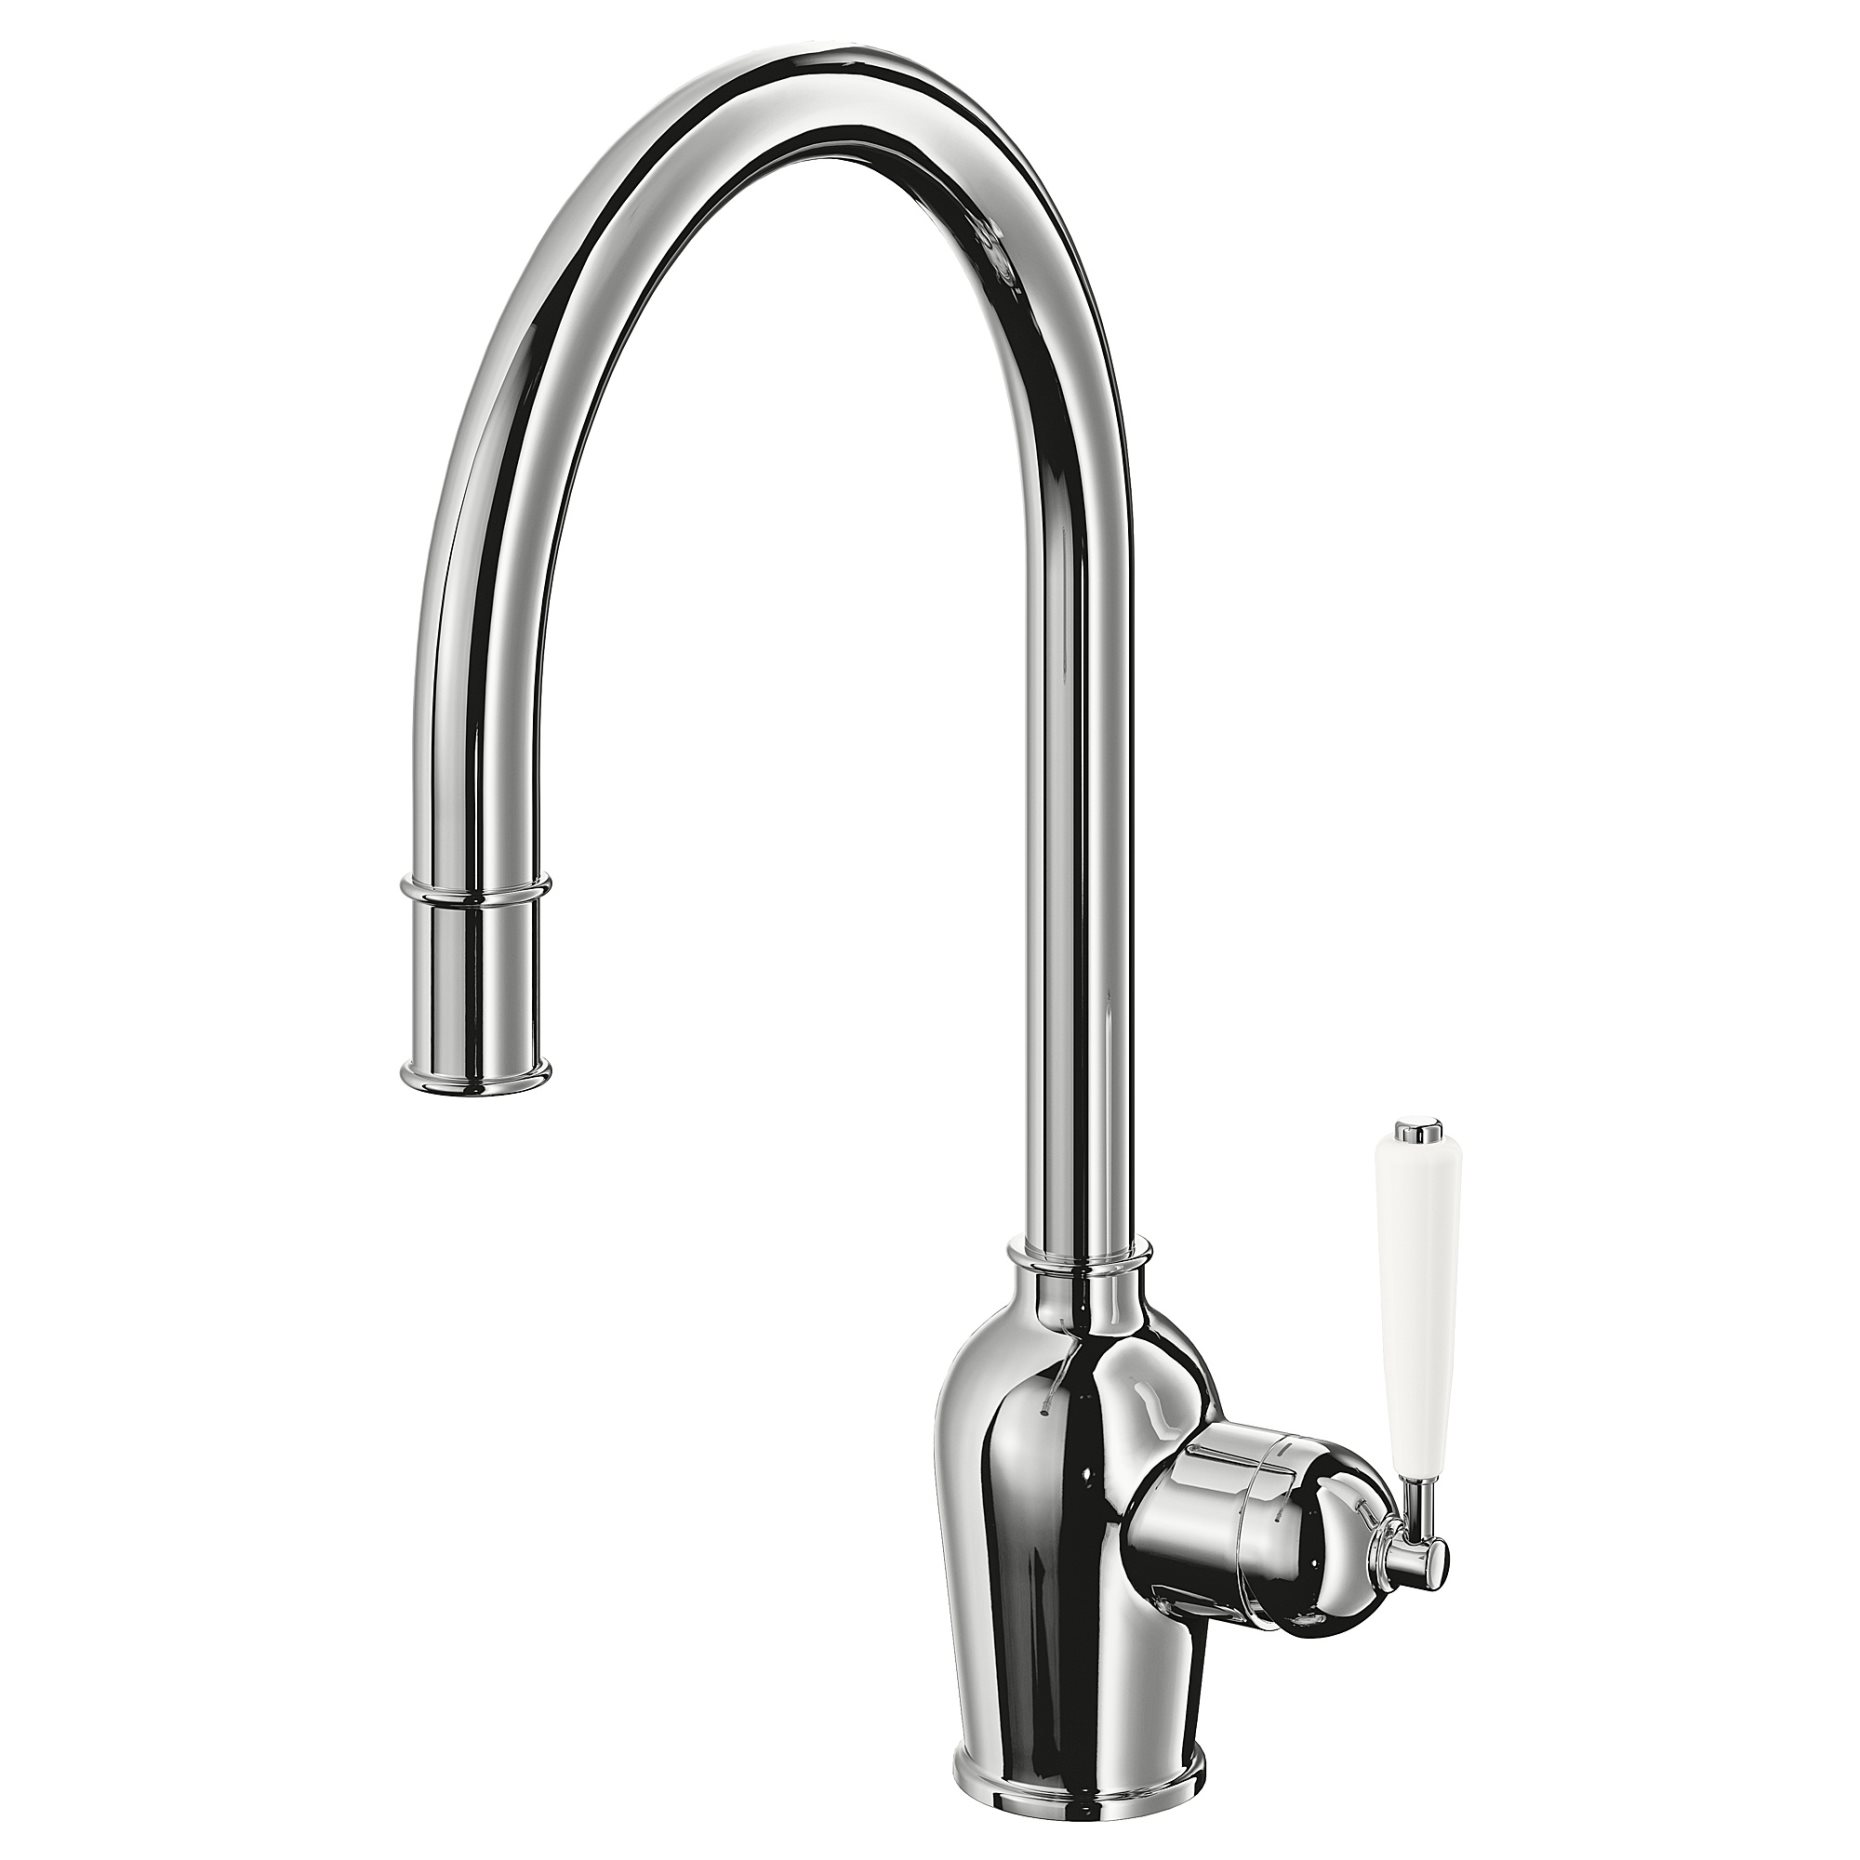 INSJÖN, kitchen mixer tap with pull-out spout, 203.418.71